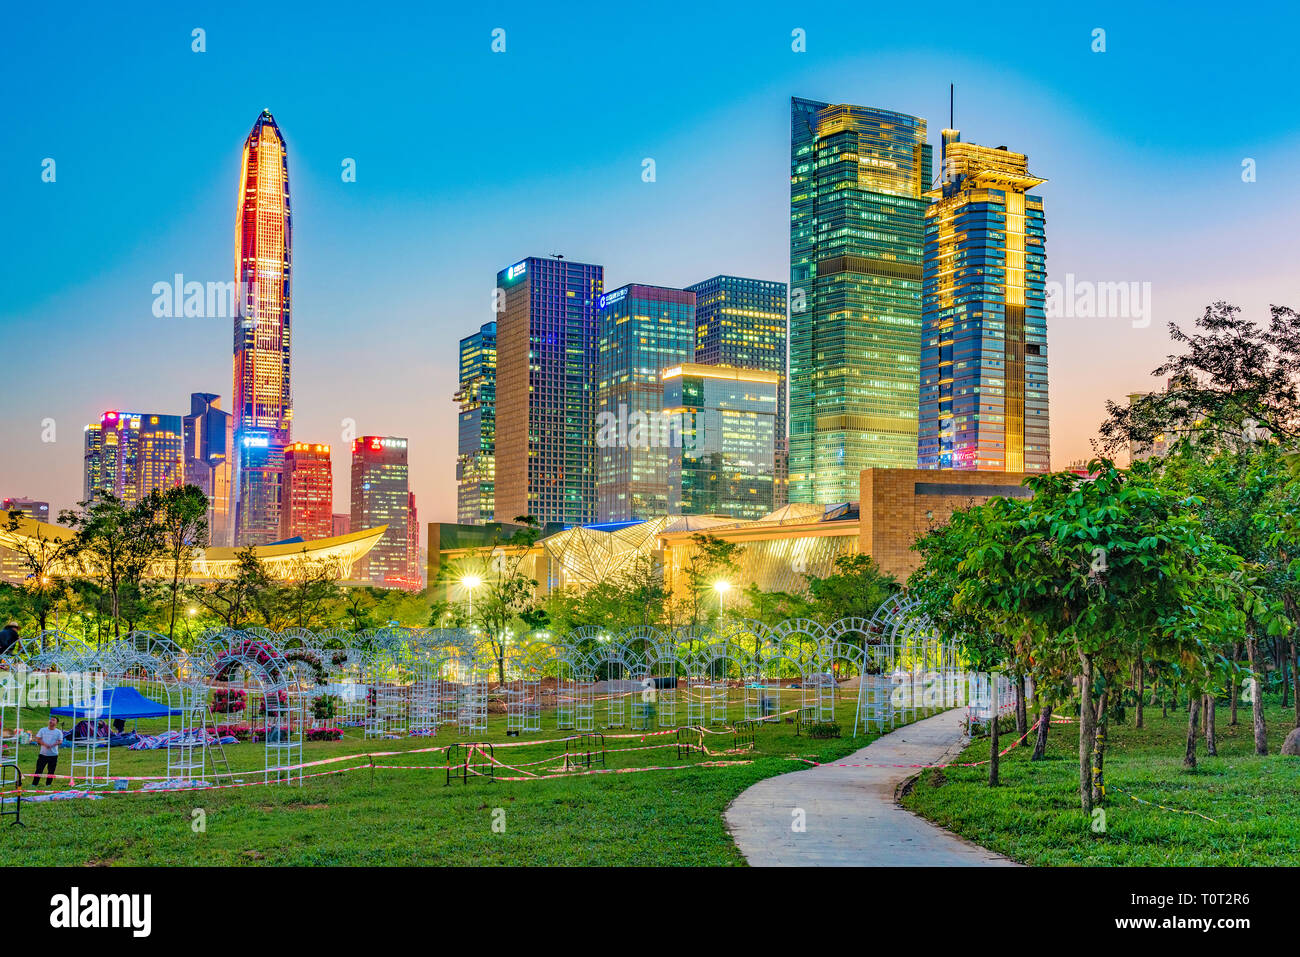 SHENZHEN, CHINA - OCTOBER 29: This is an evening view of modern city buildings in the downtown financial district, taken from Lianhuashan Park on Octo Stock Photo